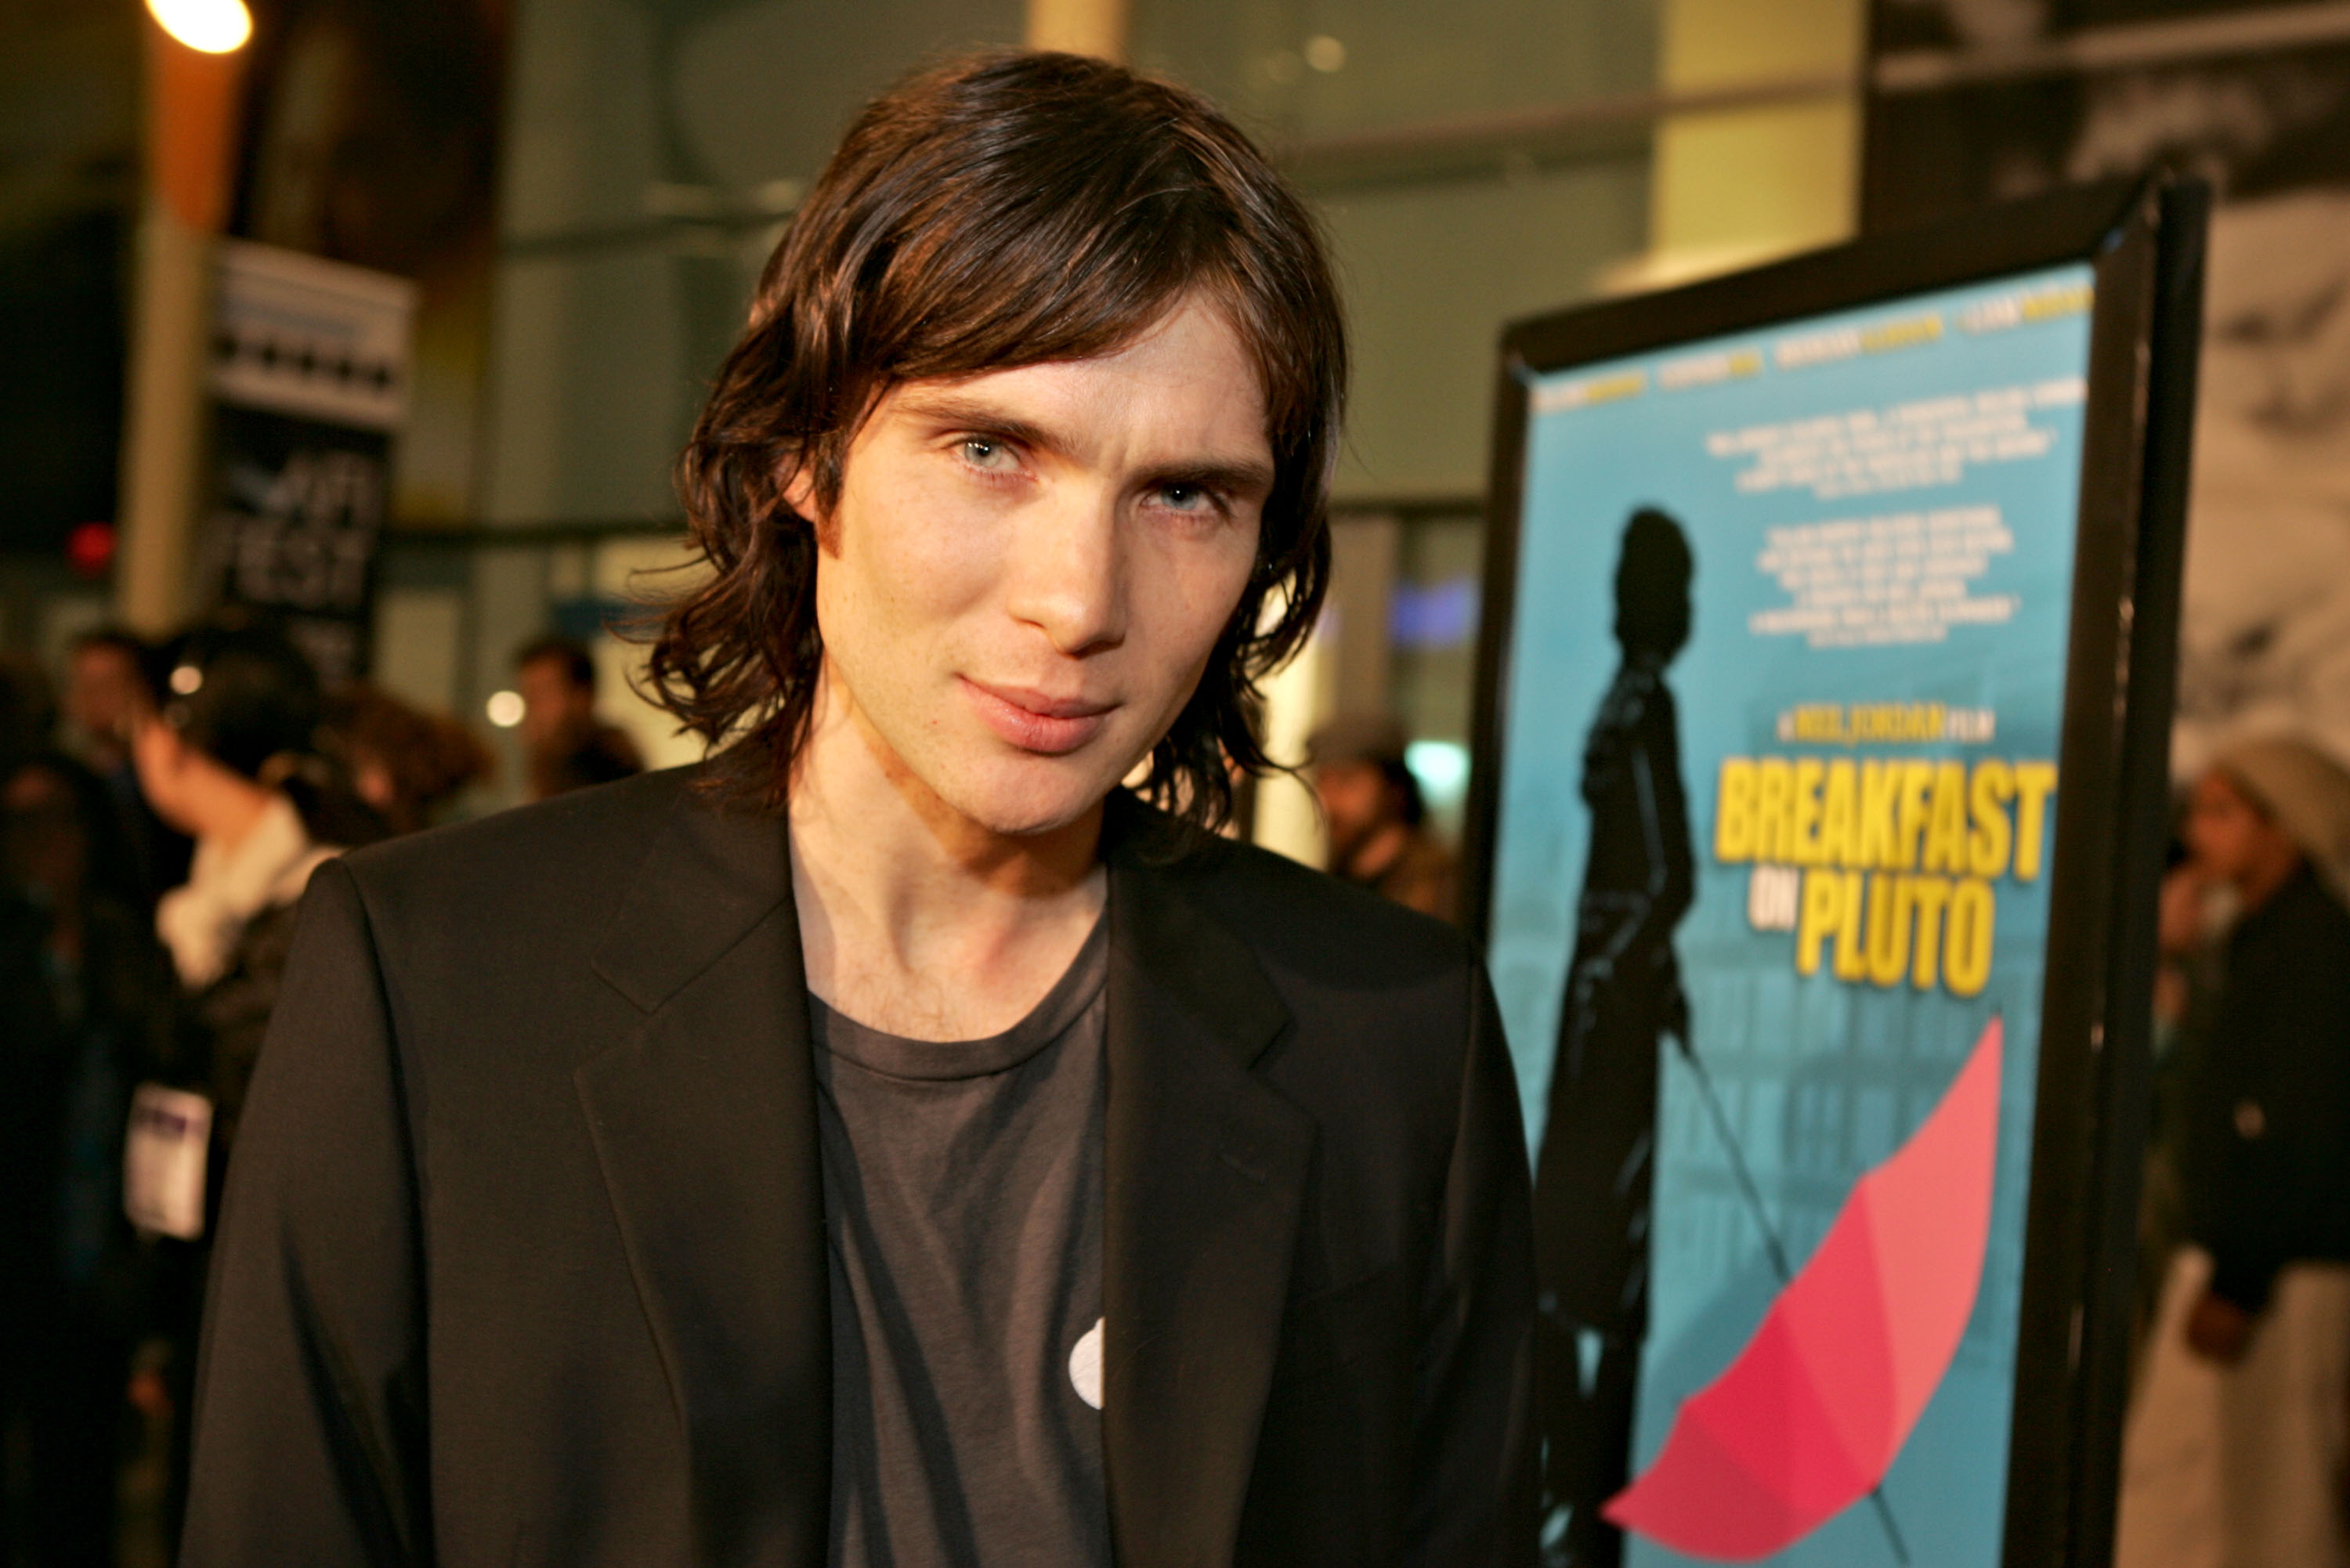 Cillian Murphy at an event for Breakfast on Pluto (2005)